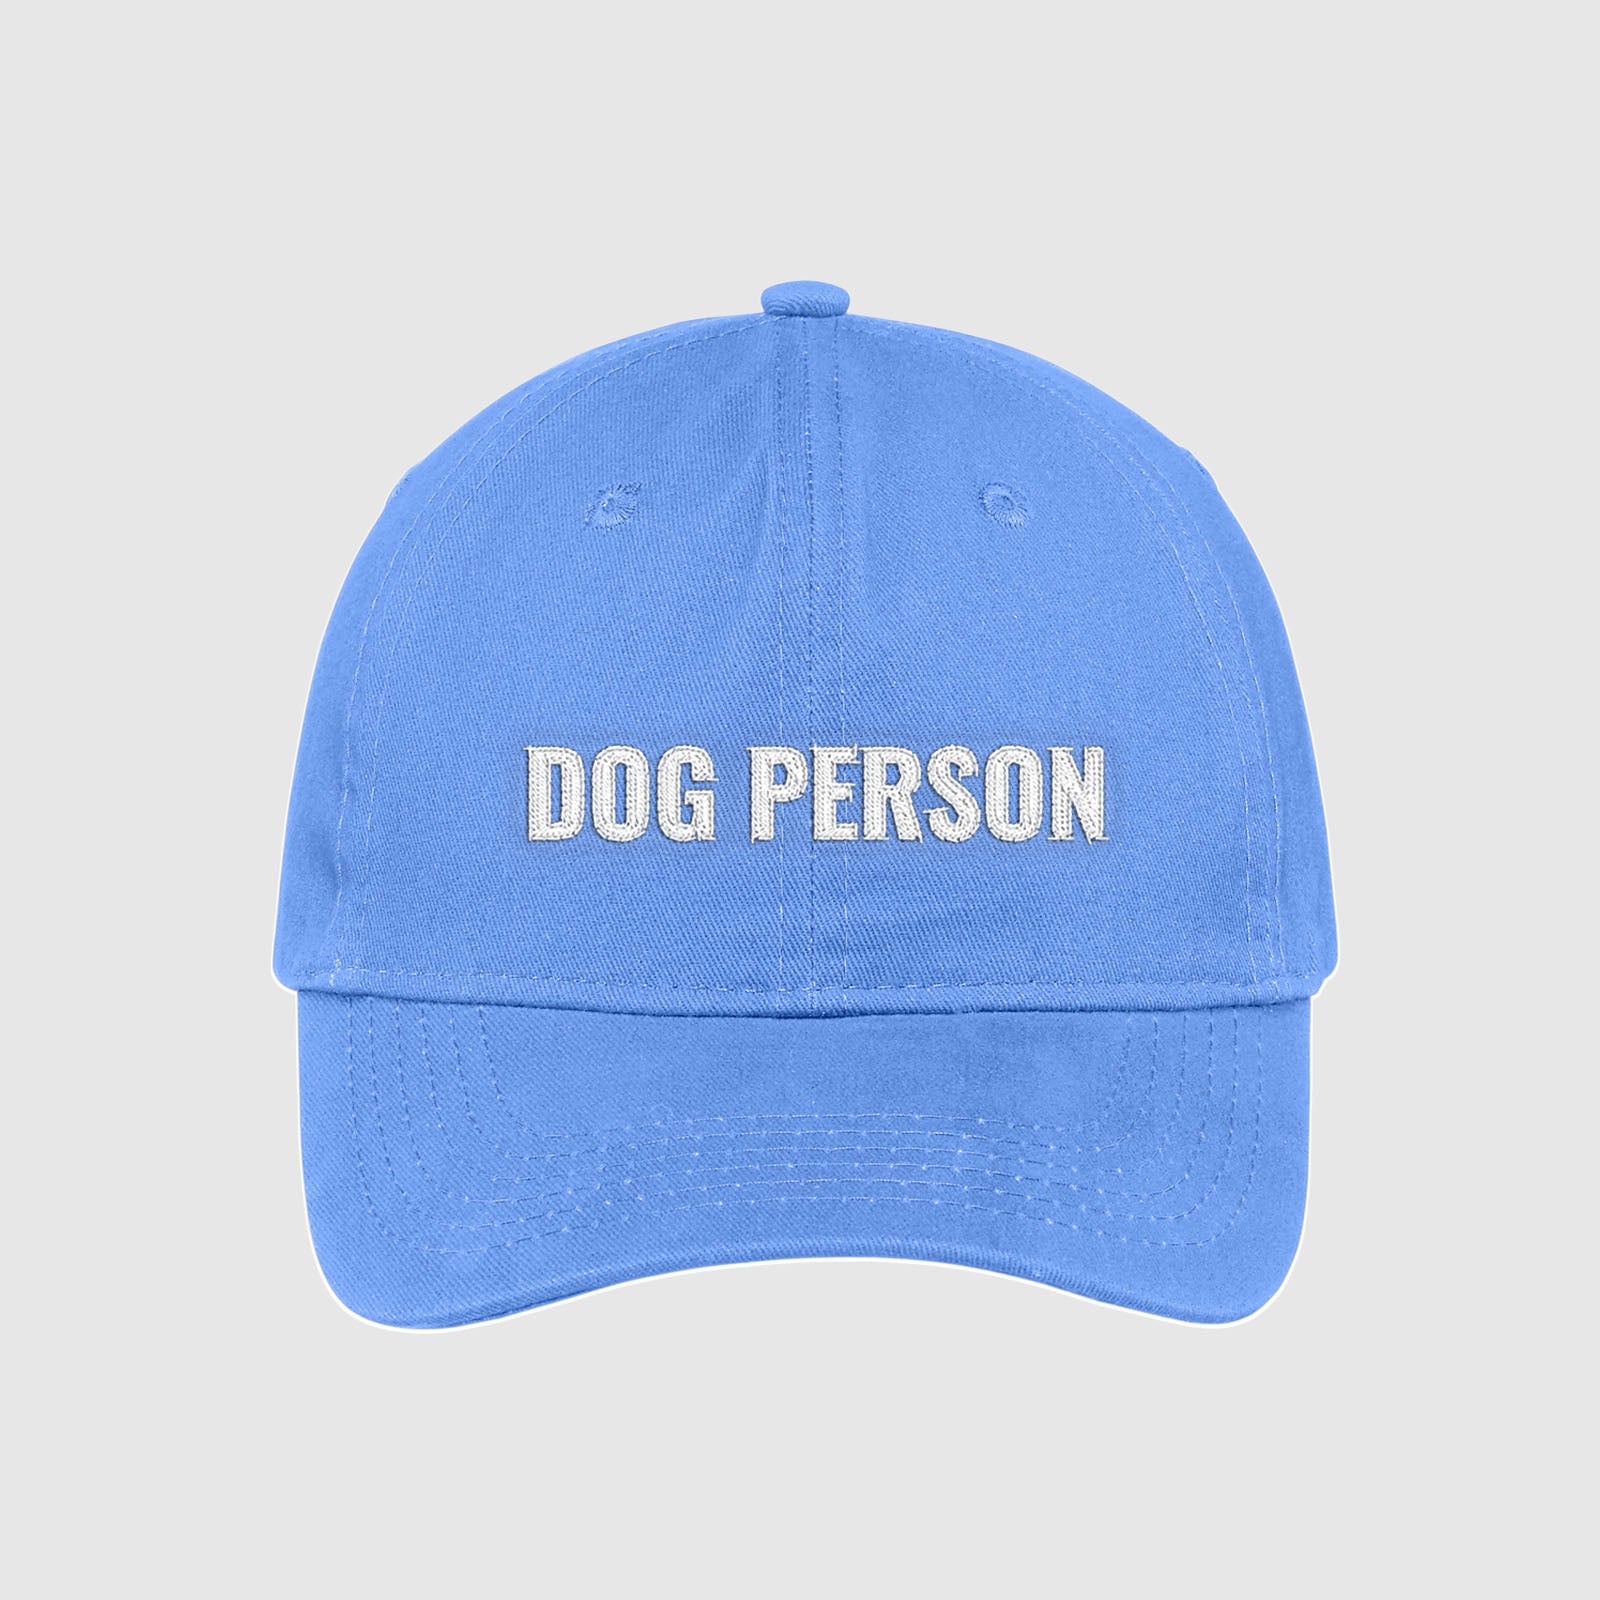 Carolina blue baby blue dad hat with Dog Person embroidered on the front with white thread.